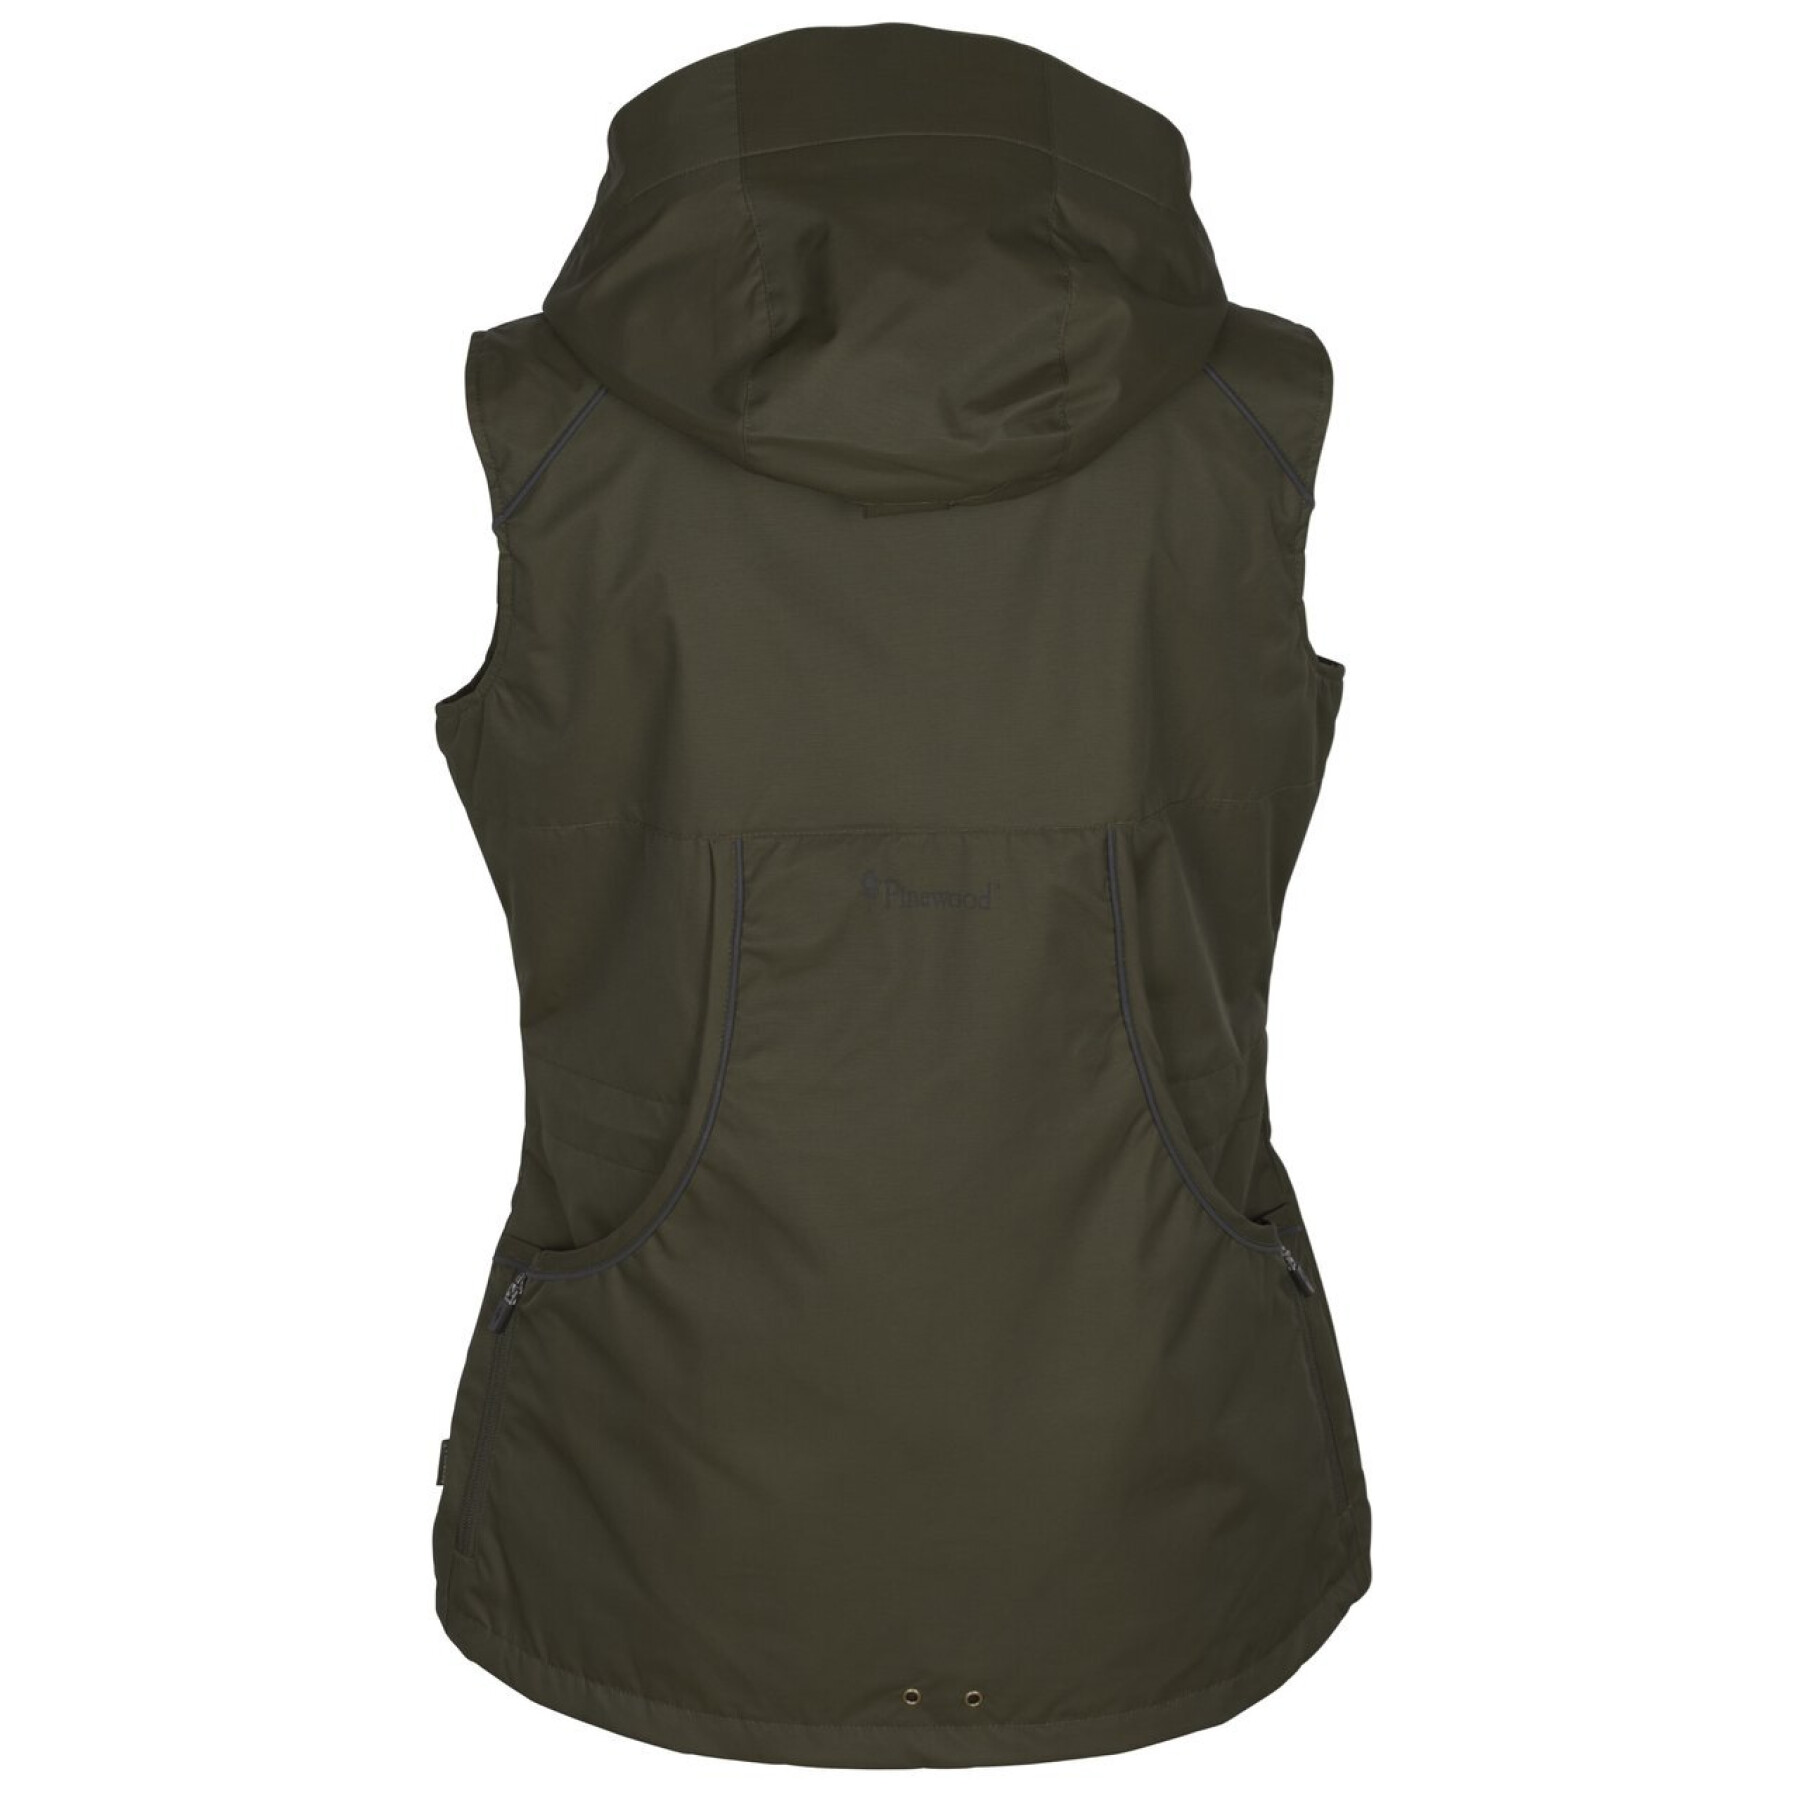 Gilet coupe-vent femme Pinewood Dog Sports